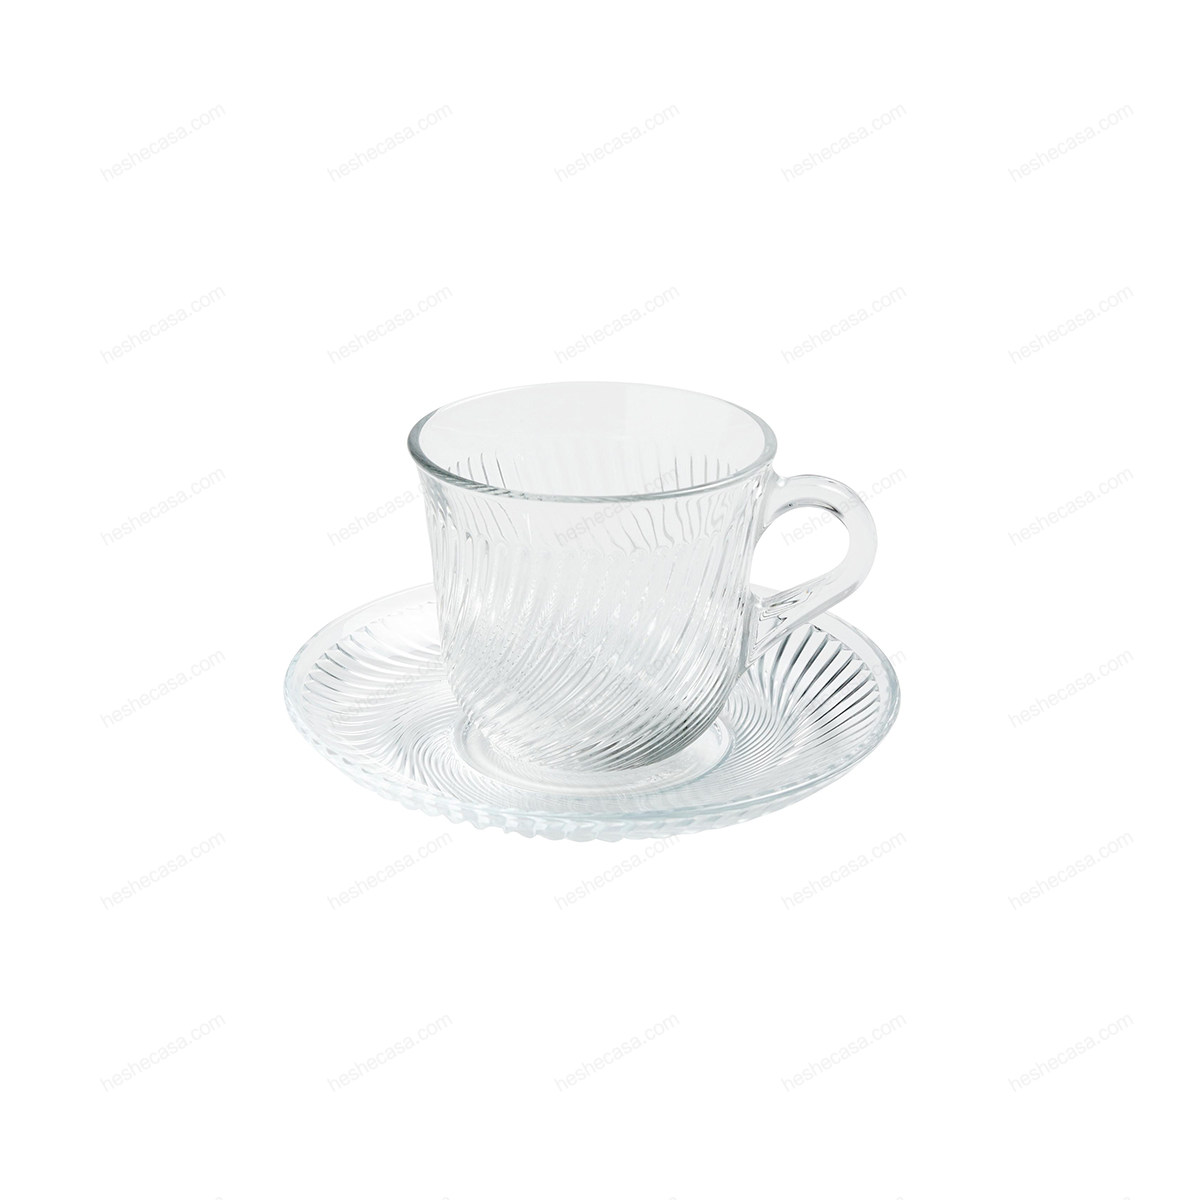 Pirouette Cup And Saucer 水杯